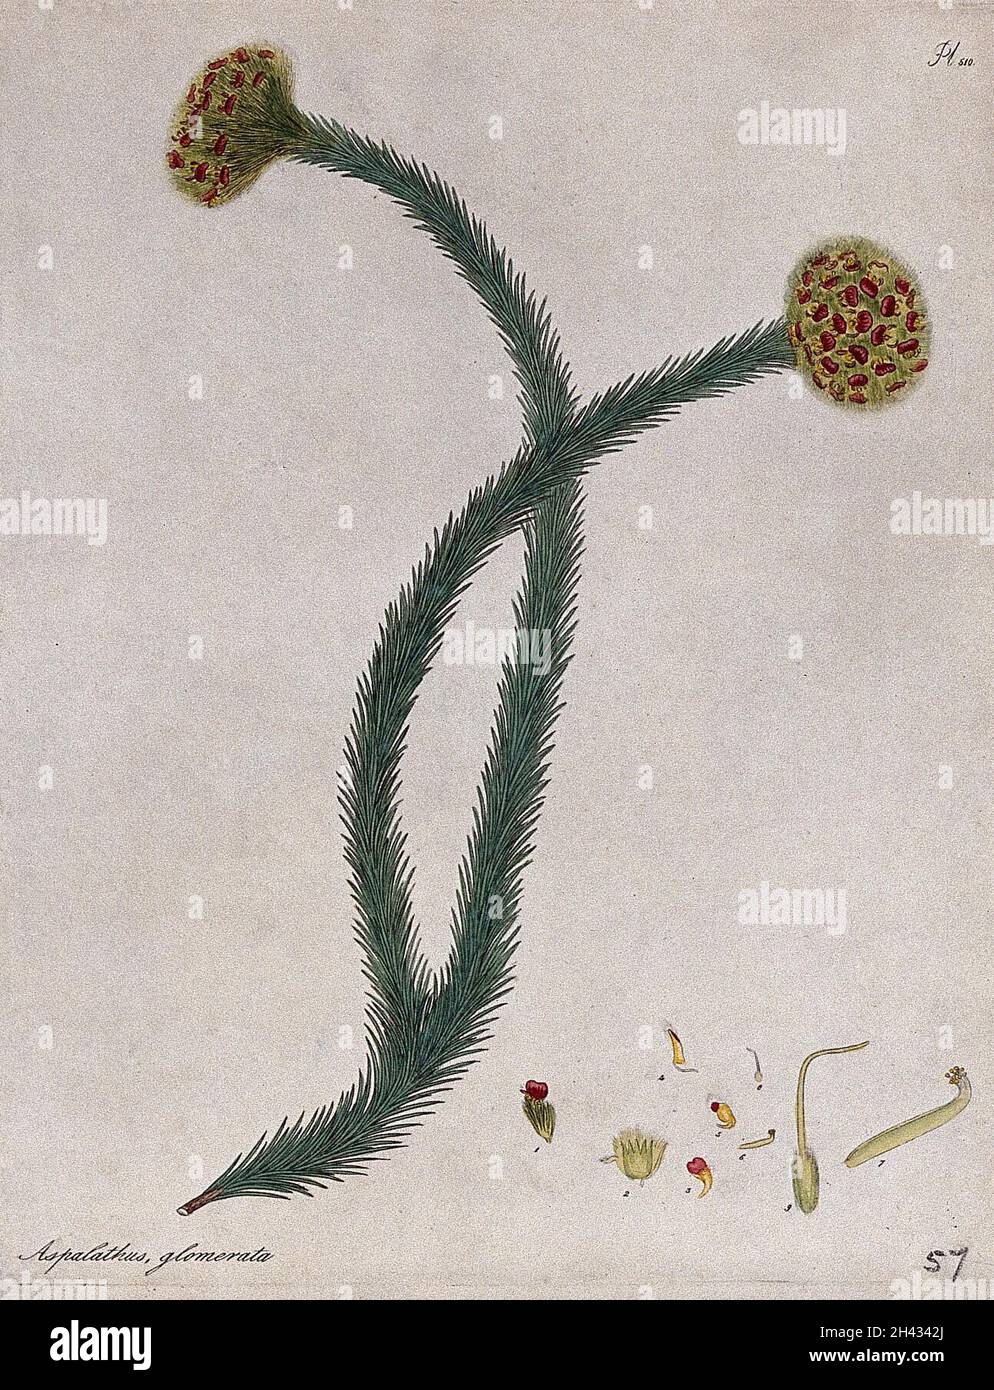 A plant (Aspalathus glomerata): flowering stem with floral segments. Coloured engraving, c. 1804, after H. Andrews. Stock Photo